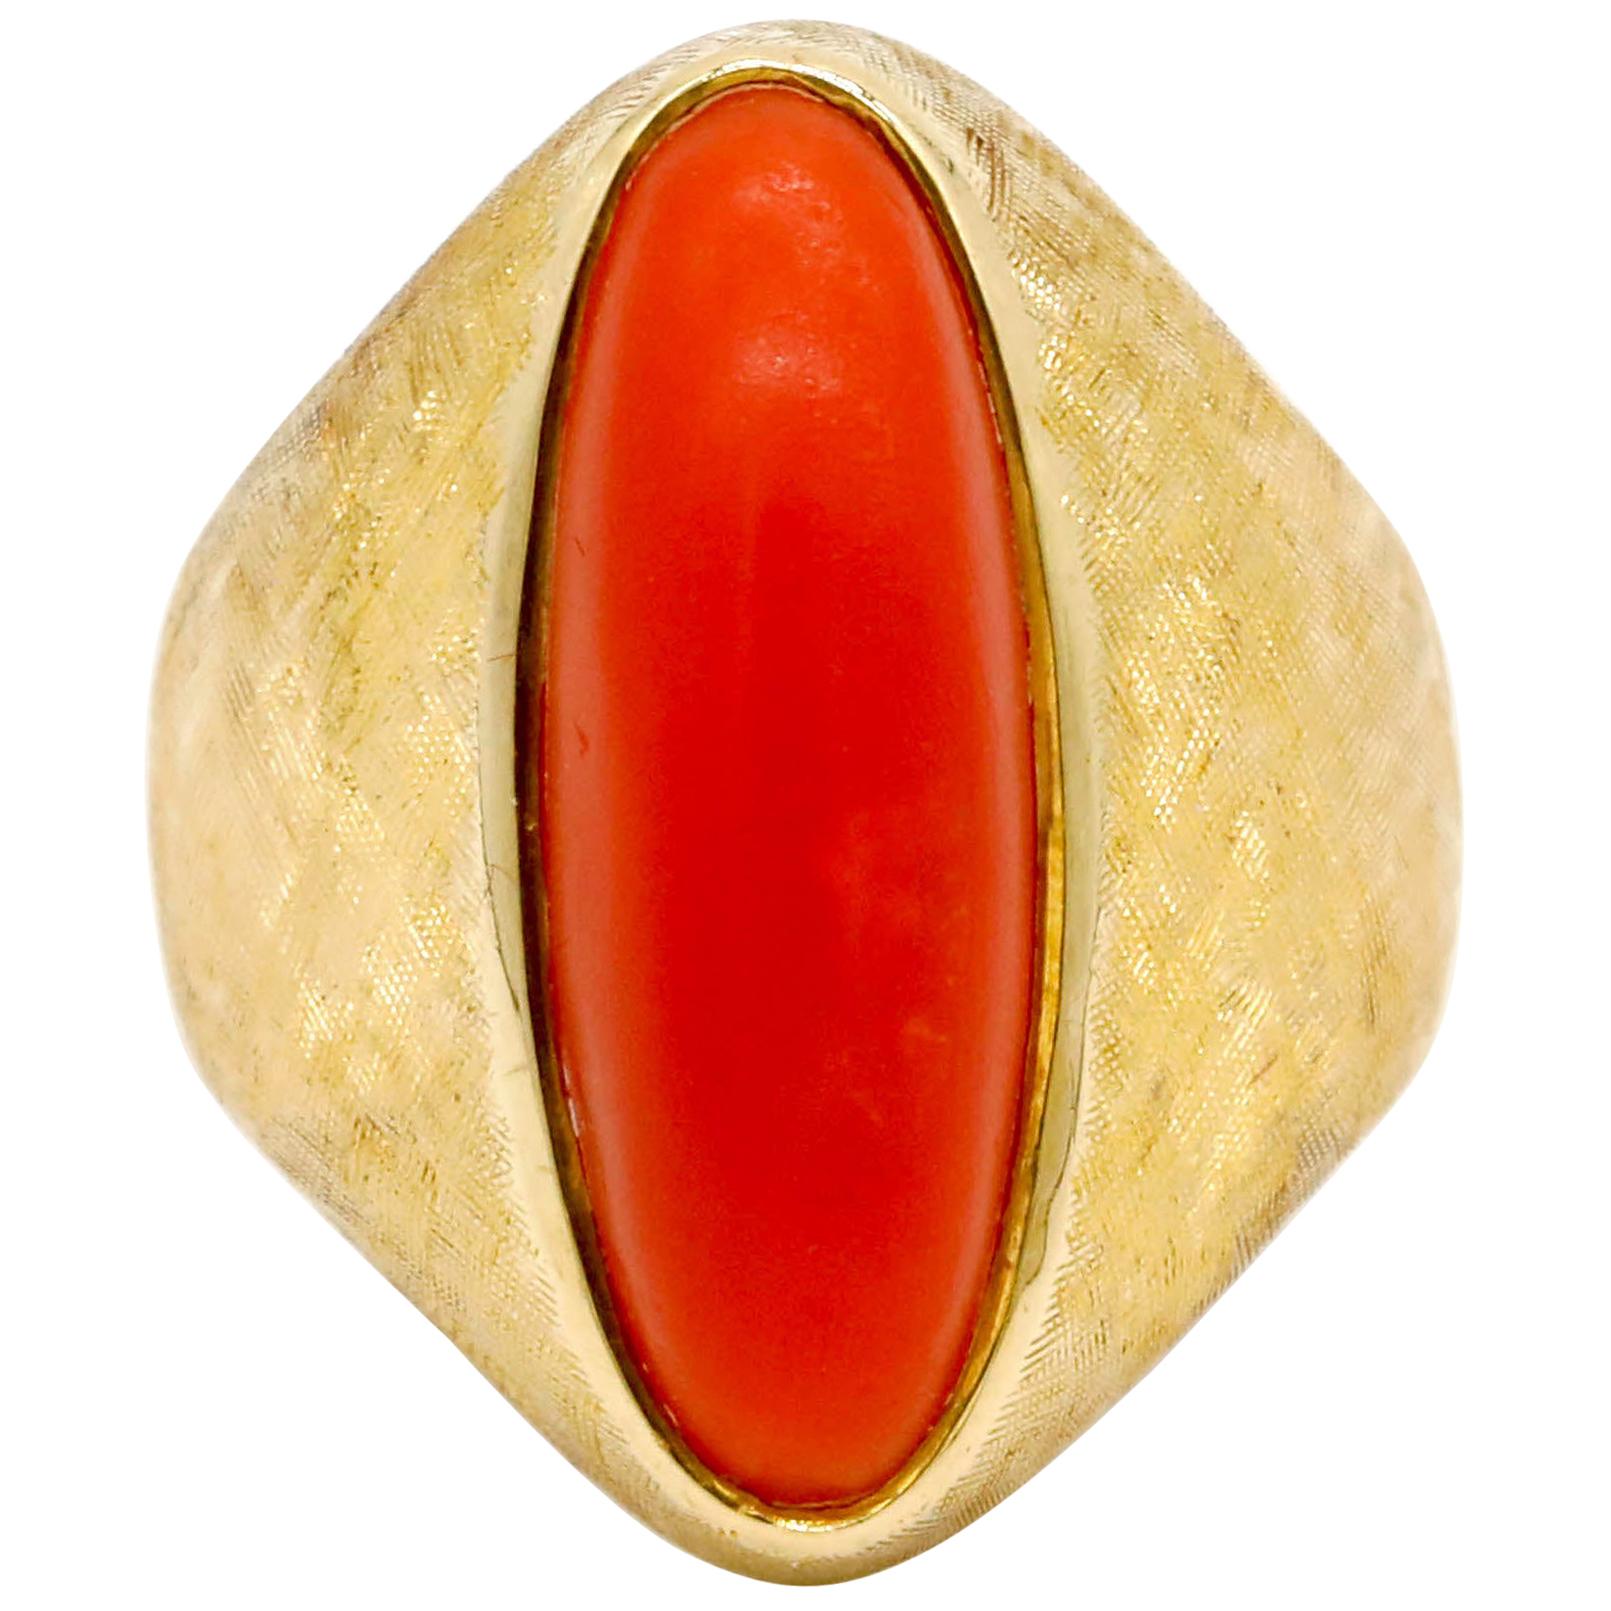 18 Karat Solid Yellow Gold Cabochon Red Coral Estate Ring Vintage Style

Gold Purity: 18 Kt
Gold Type: Yellow Gold
Gold Weight: 10 gms
Red Coral Wt: - Carat
Size: US 7 and Resizable.
Item Style: Yellow Gold Estate Ring

Keywords: Ring, Solitaire